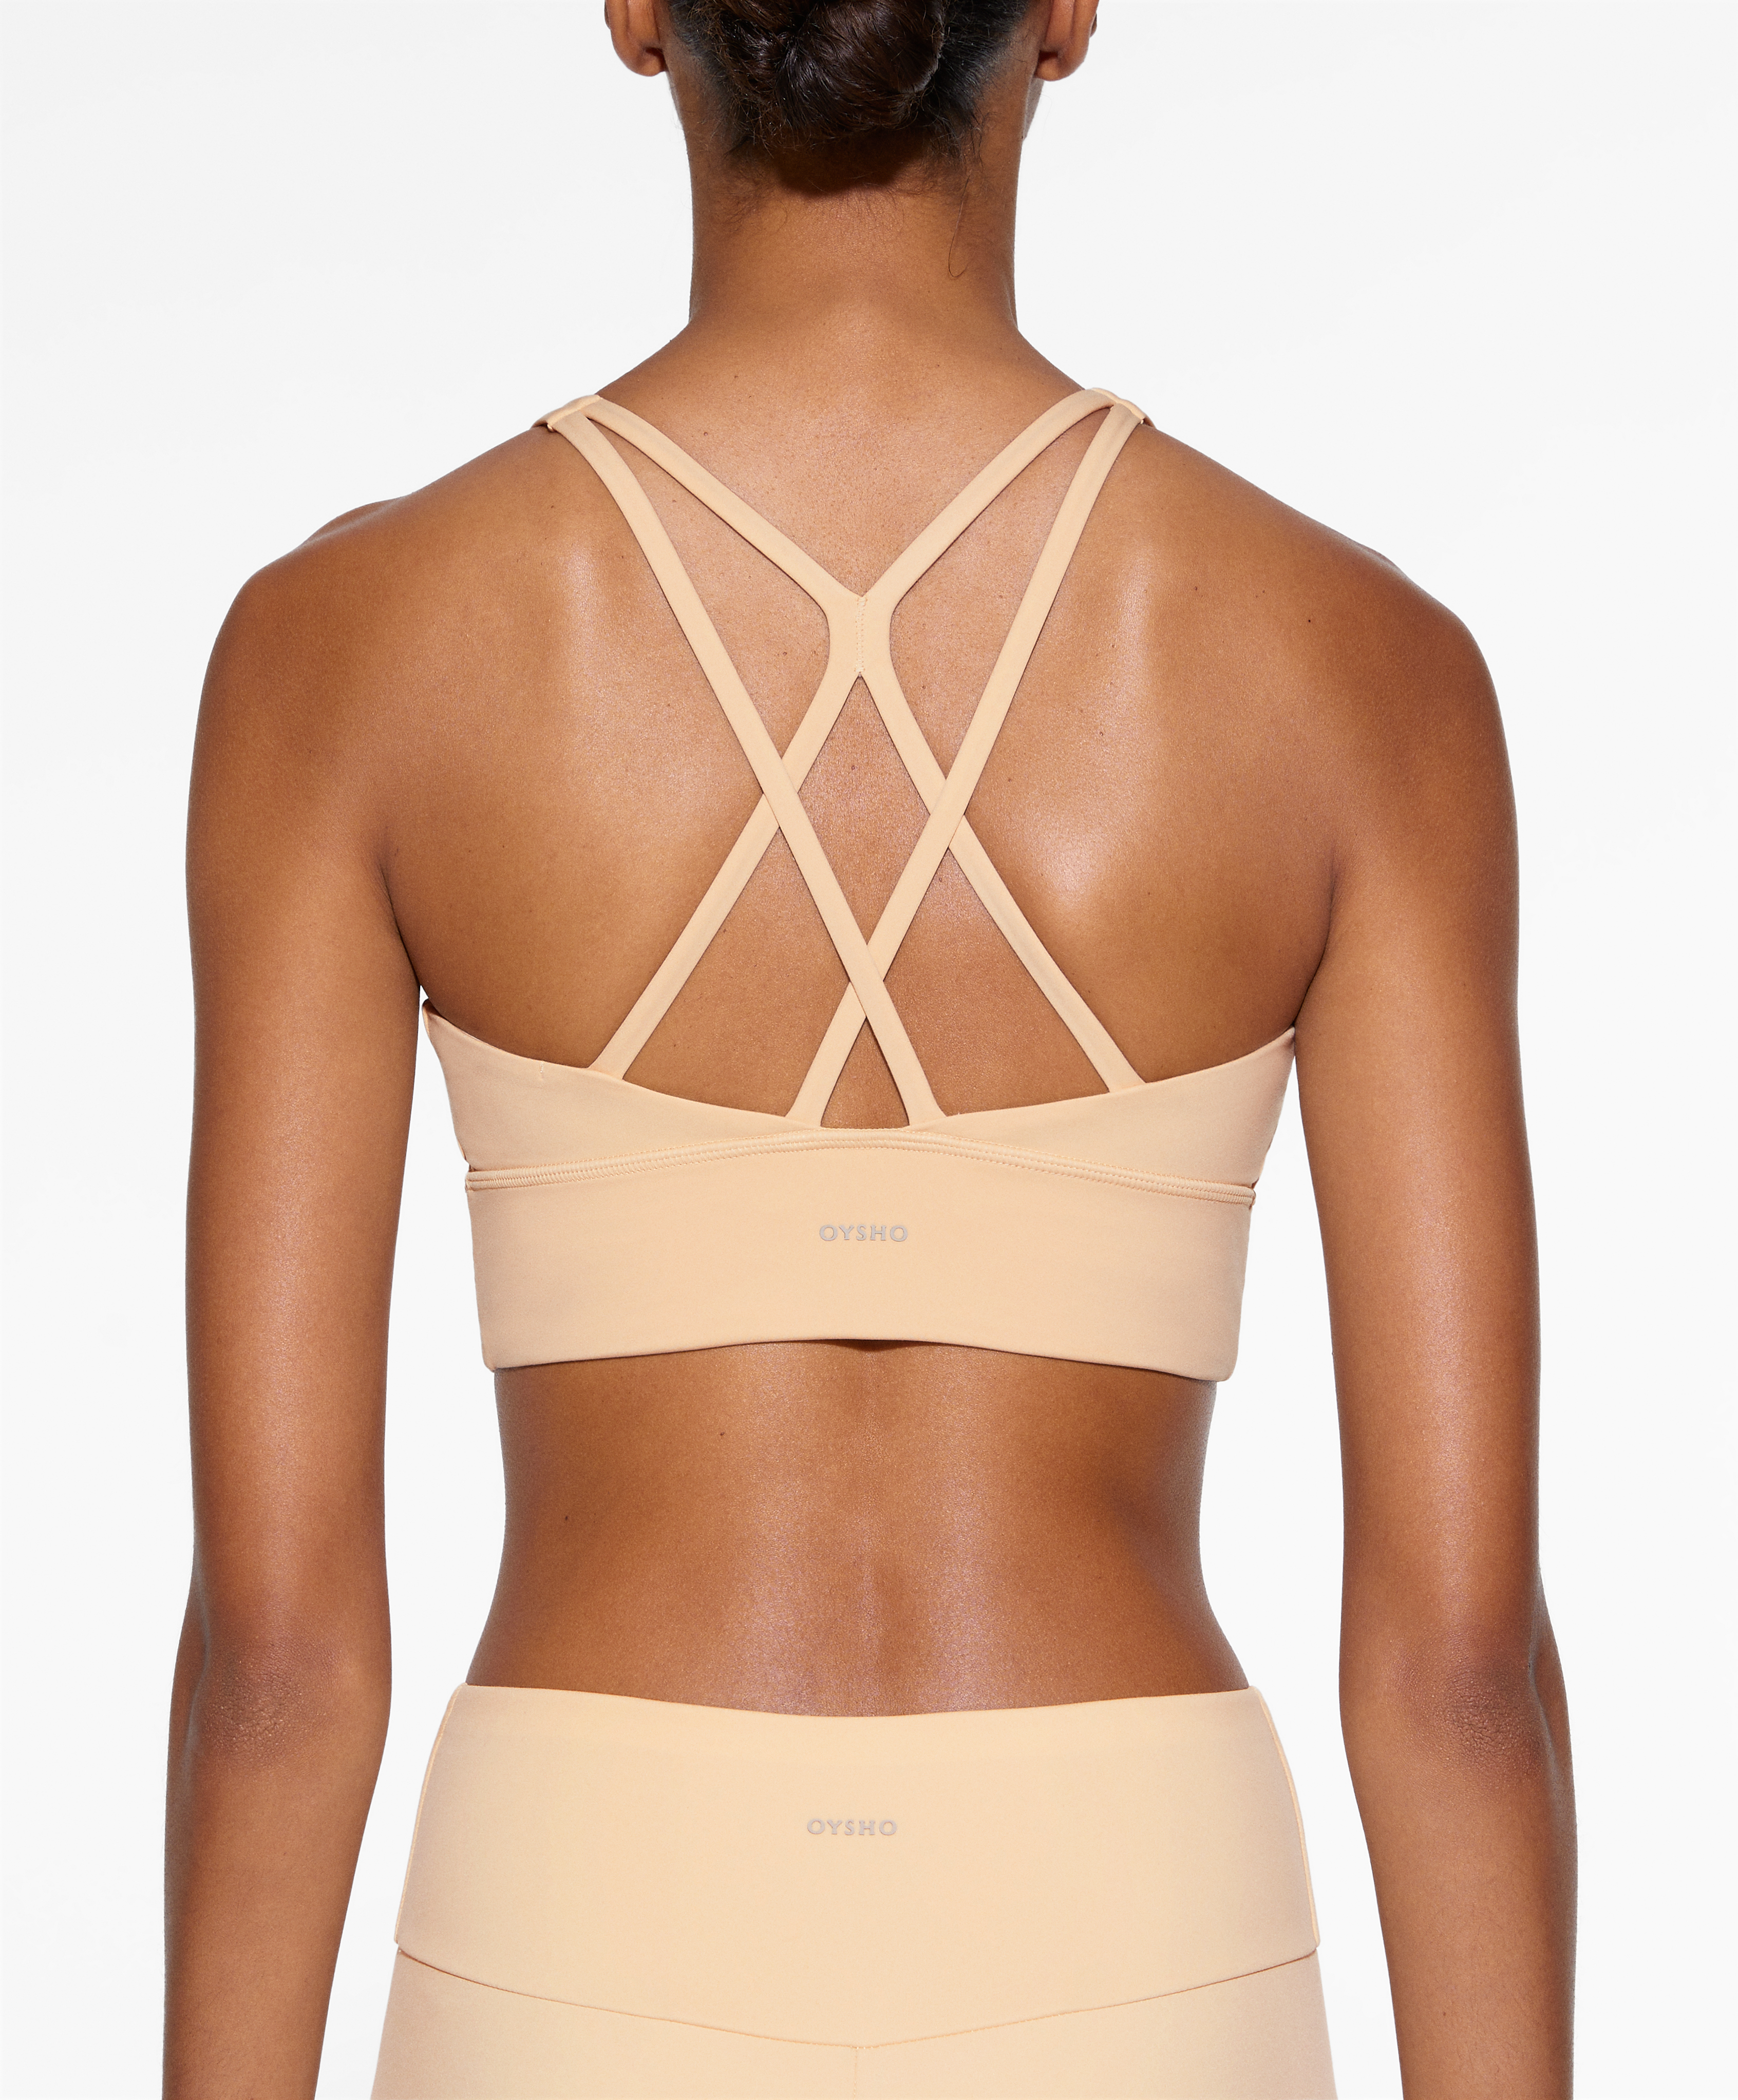 Medium-support sports bra with cups